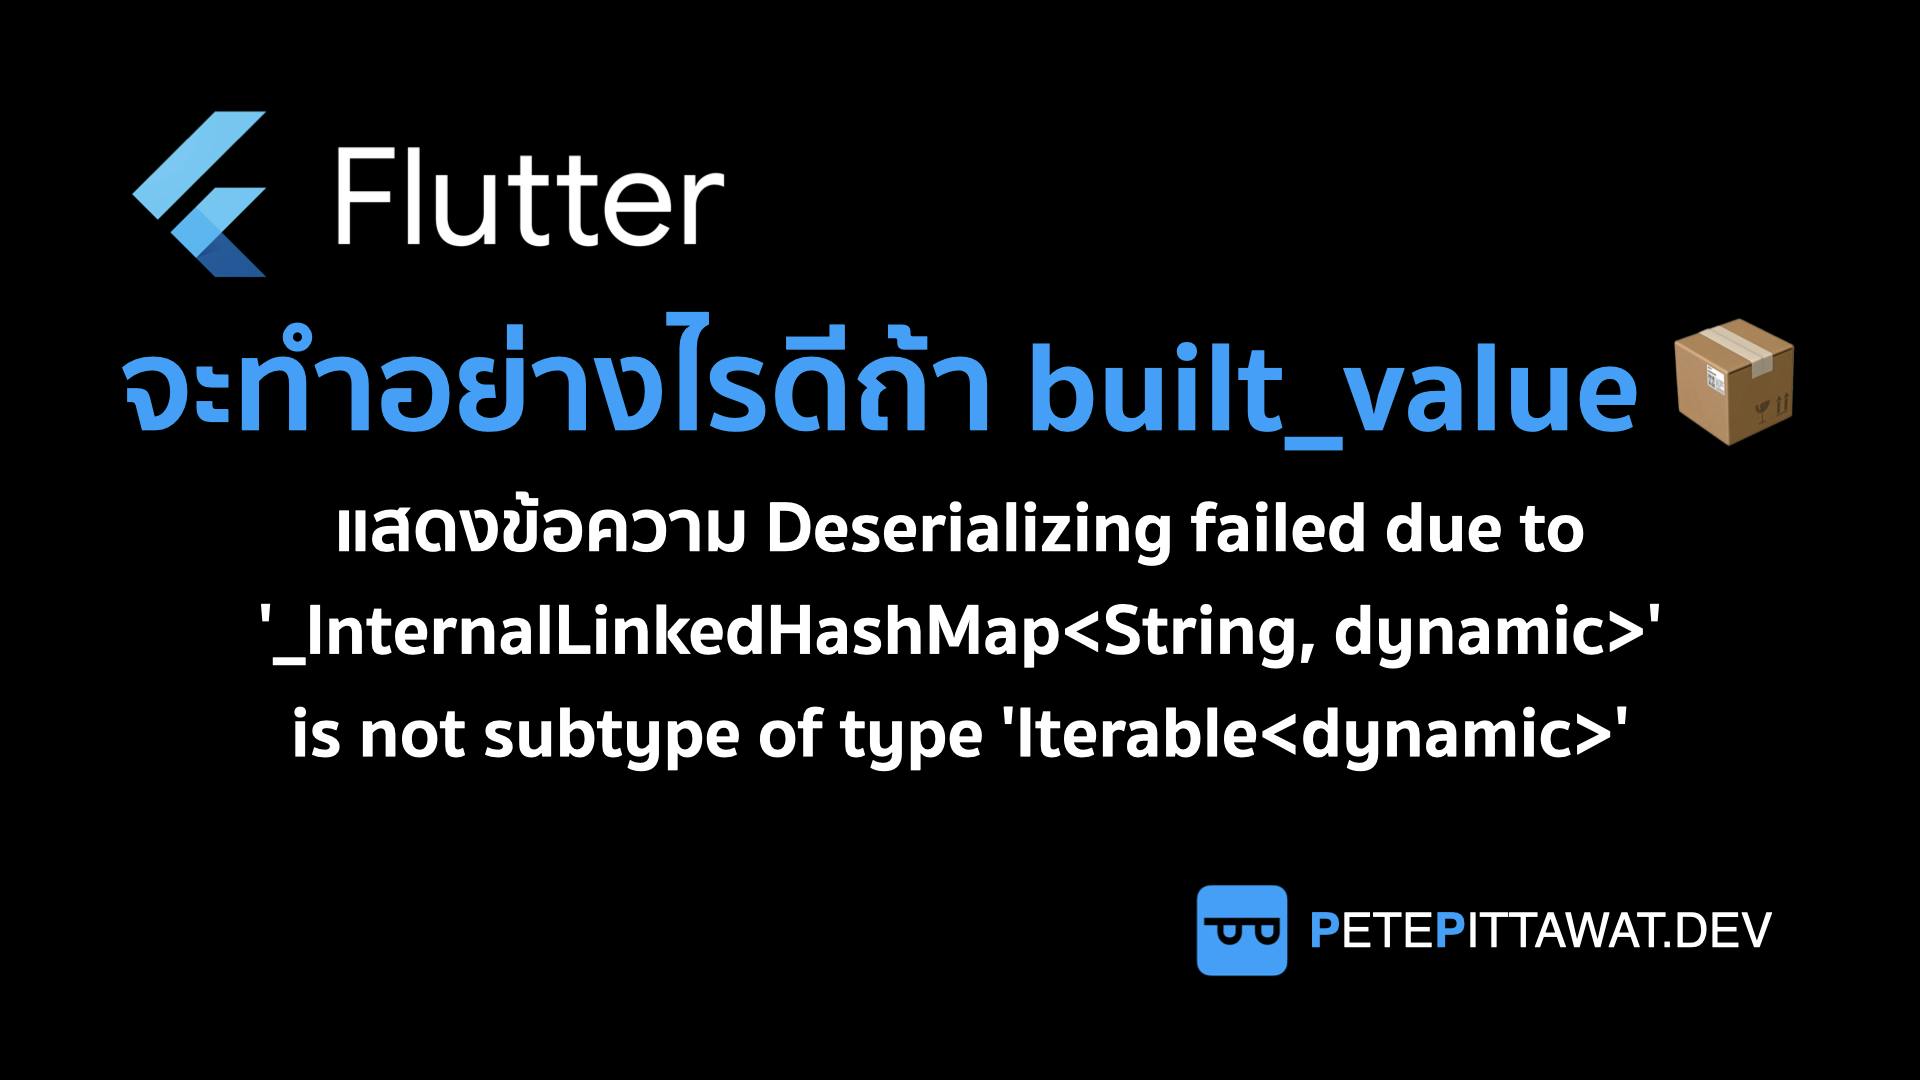 Cover Image for Flutter: วิธีแก้ปัญหาใช้ built_value แล้วเจอ Deserializing failed due to '_InternalLinkedHashMap <String, dynamic>' is not subtype of type 'Iterable<dynamic>'